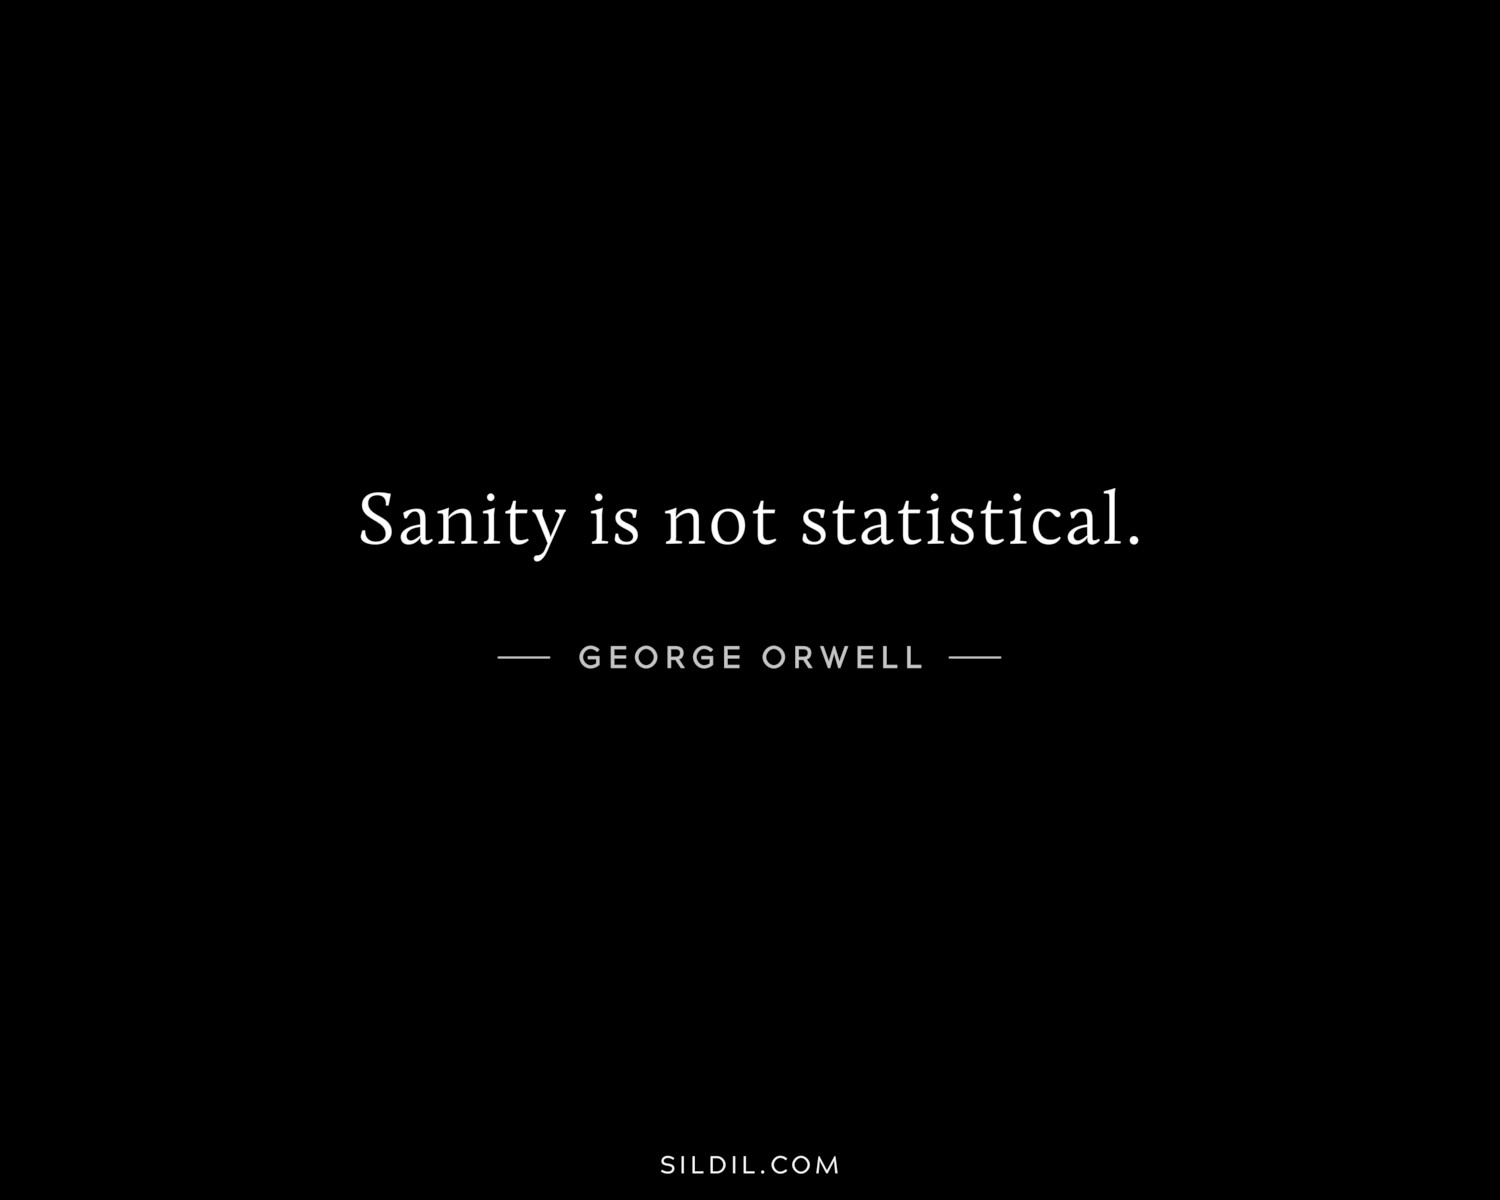 Sanity is not statistical.